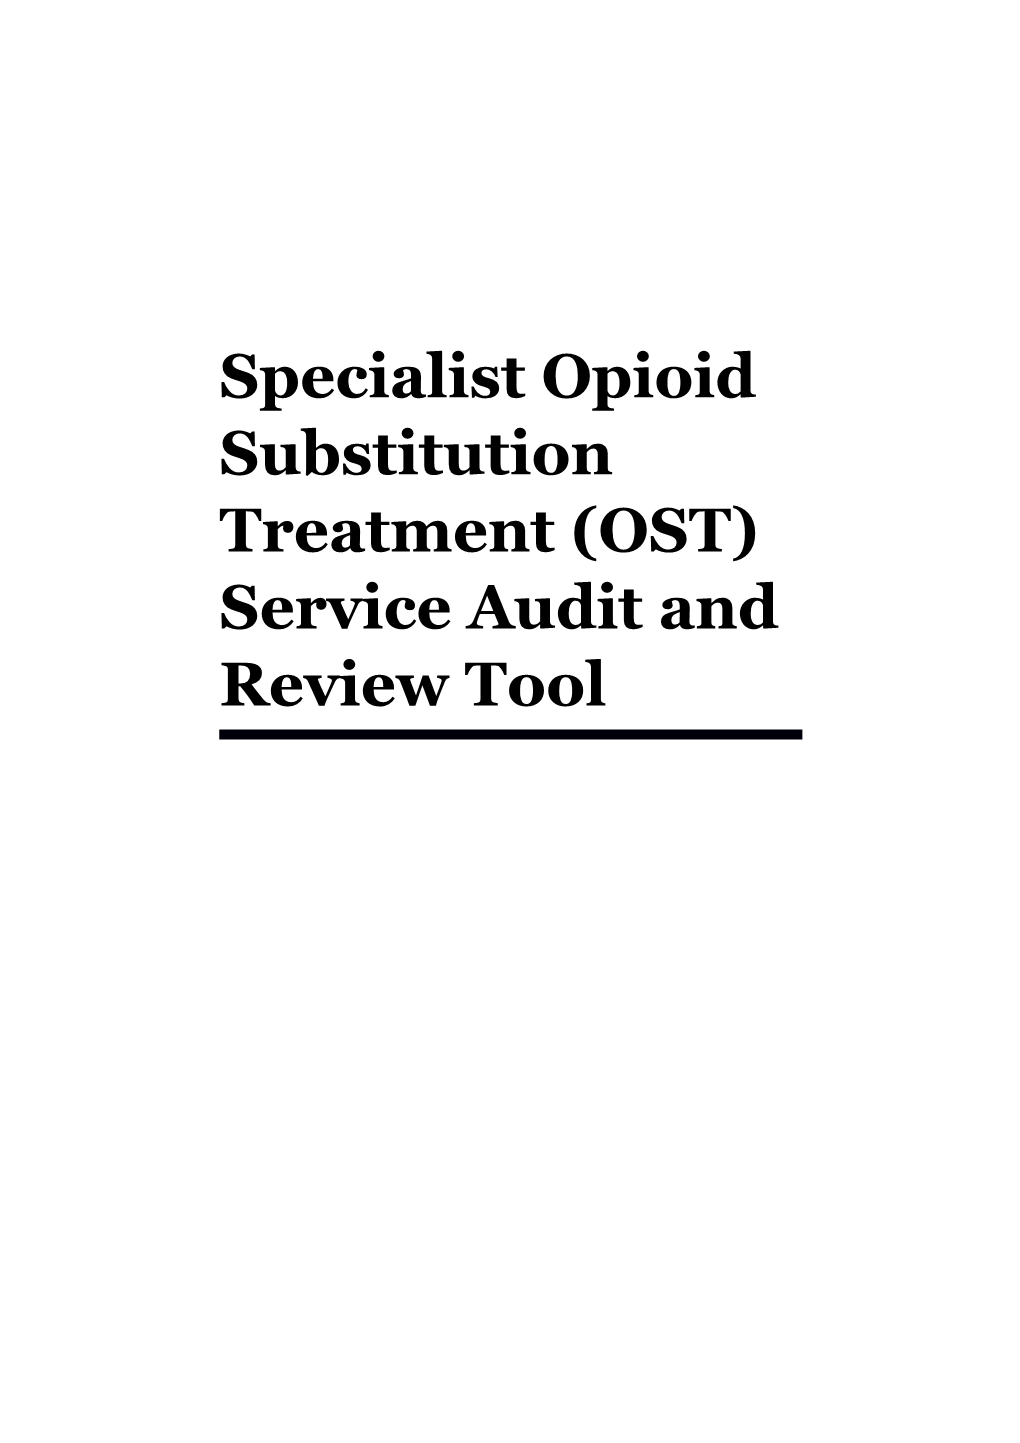 Specialist Opioid Substitution Treatment (OST) Service Audit and Review Tool